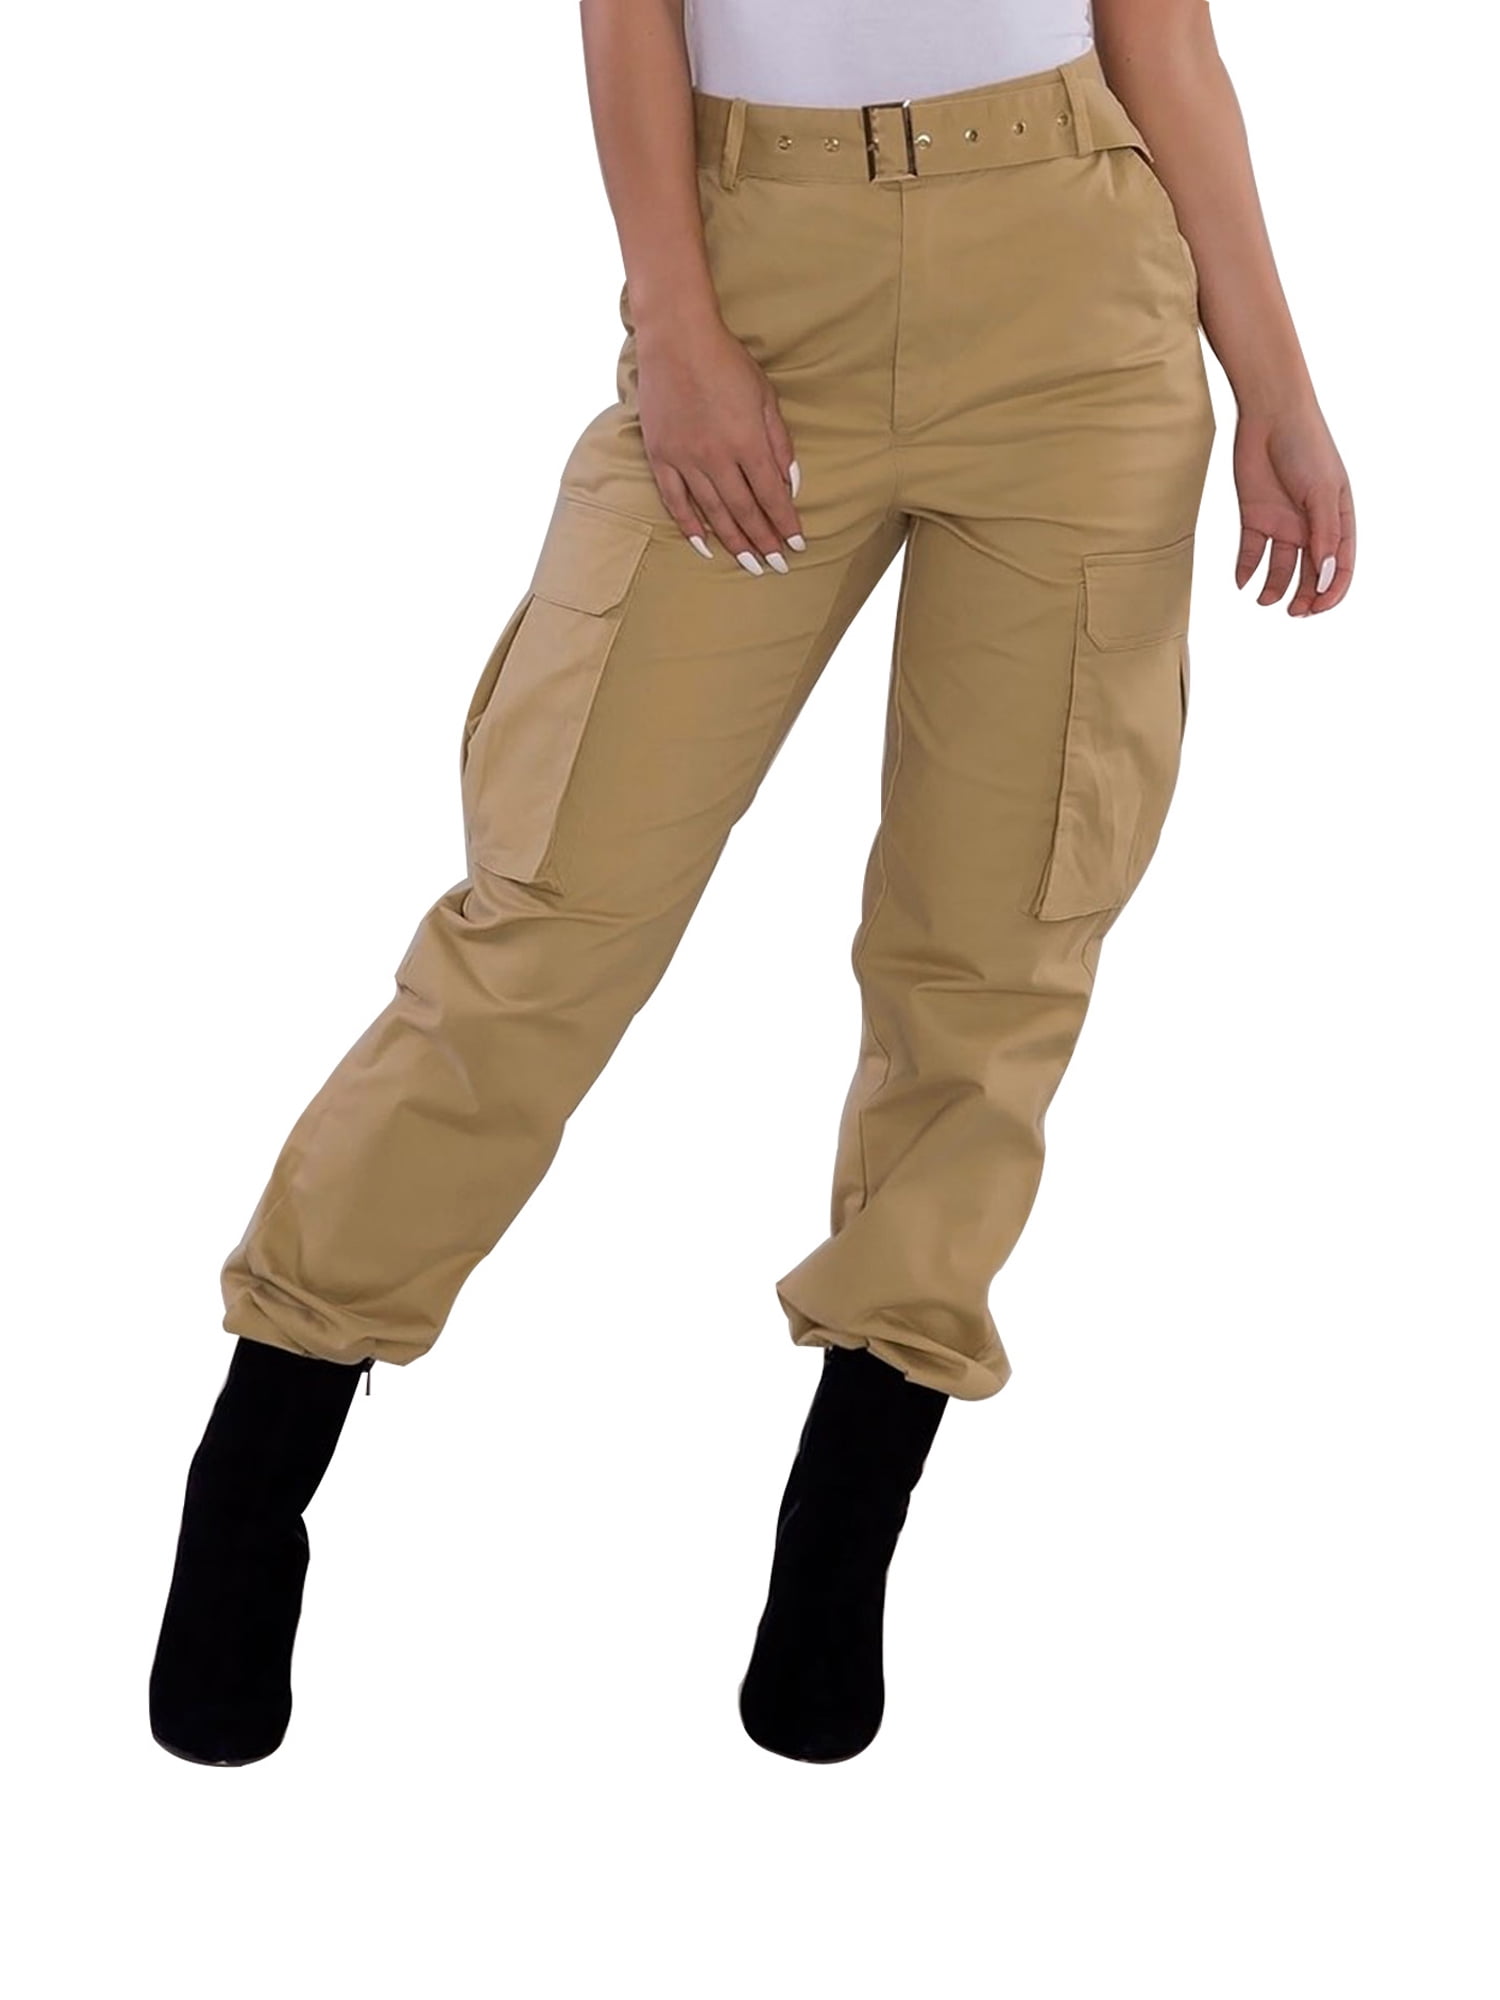 Womens Trousers Army Military Ladies Casual Cargo Pants Ladies Loose Fit Pockets 